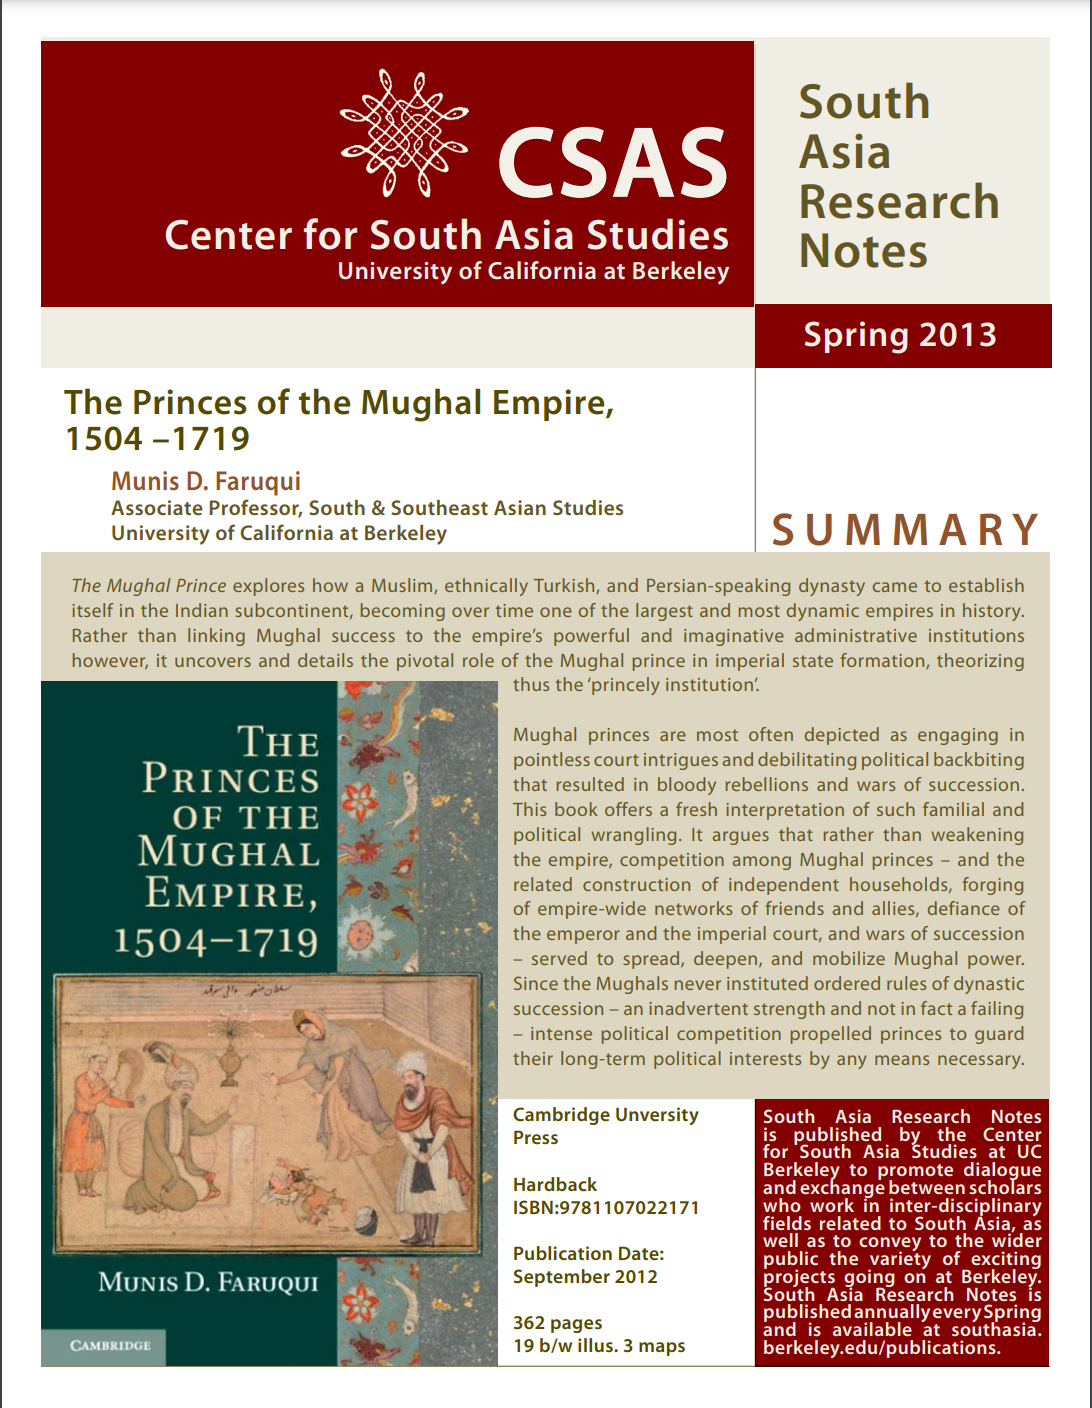 Cover image of SA Research Notes, Spring 2013 by Munis D. Faruqui